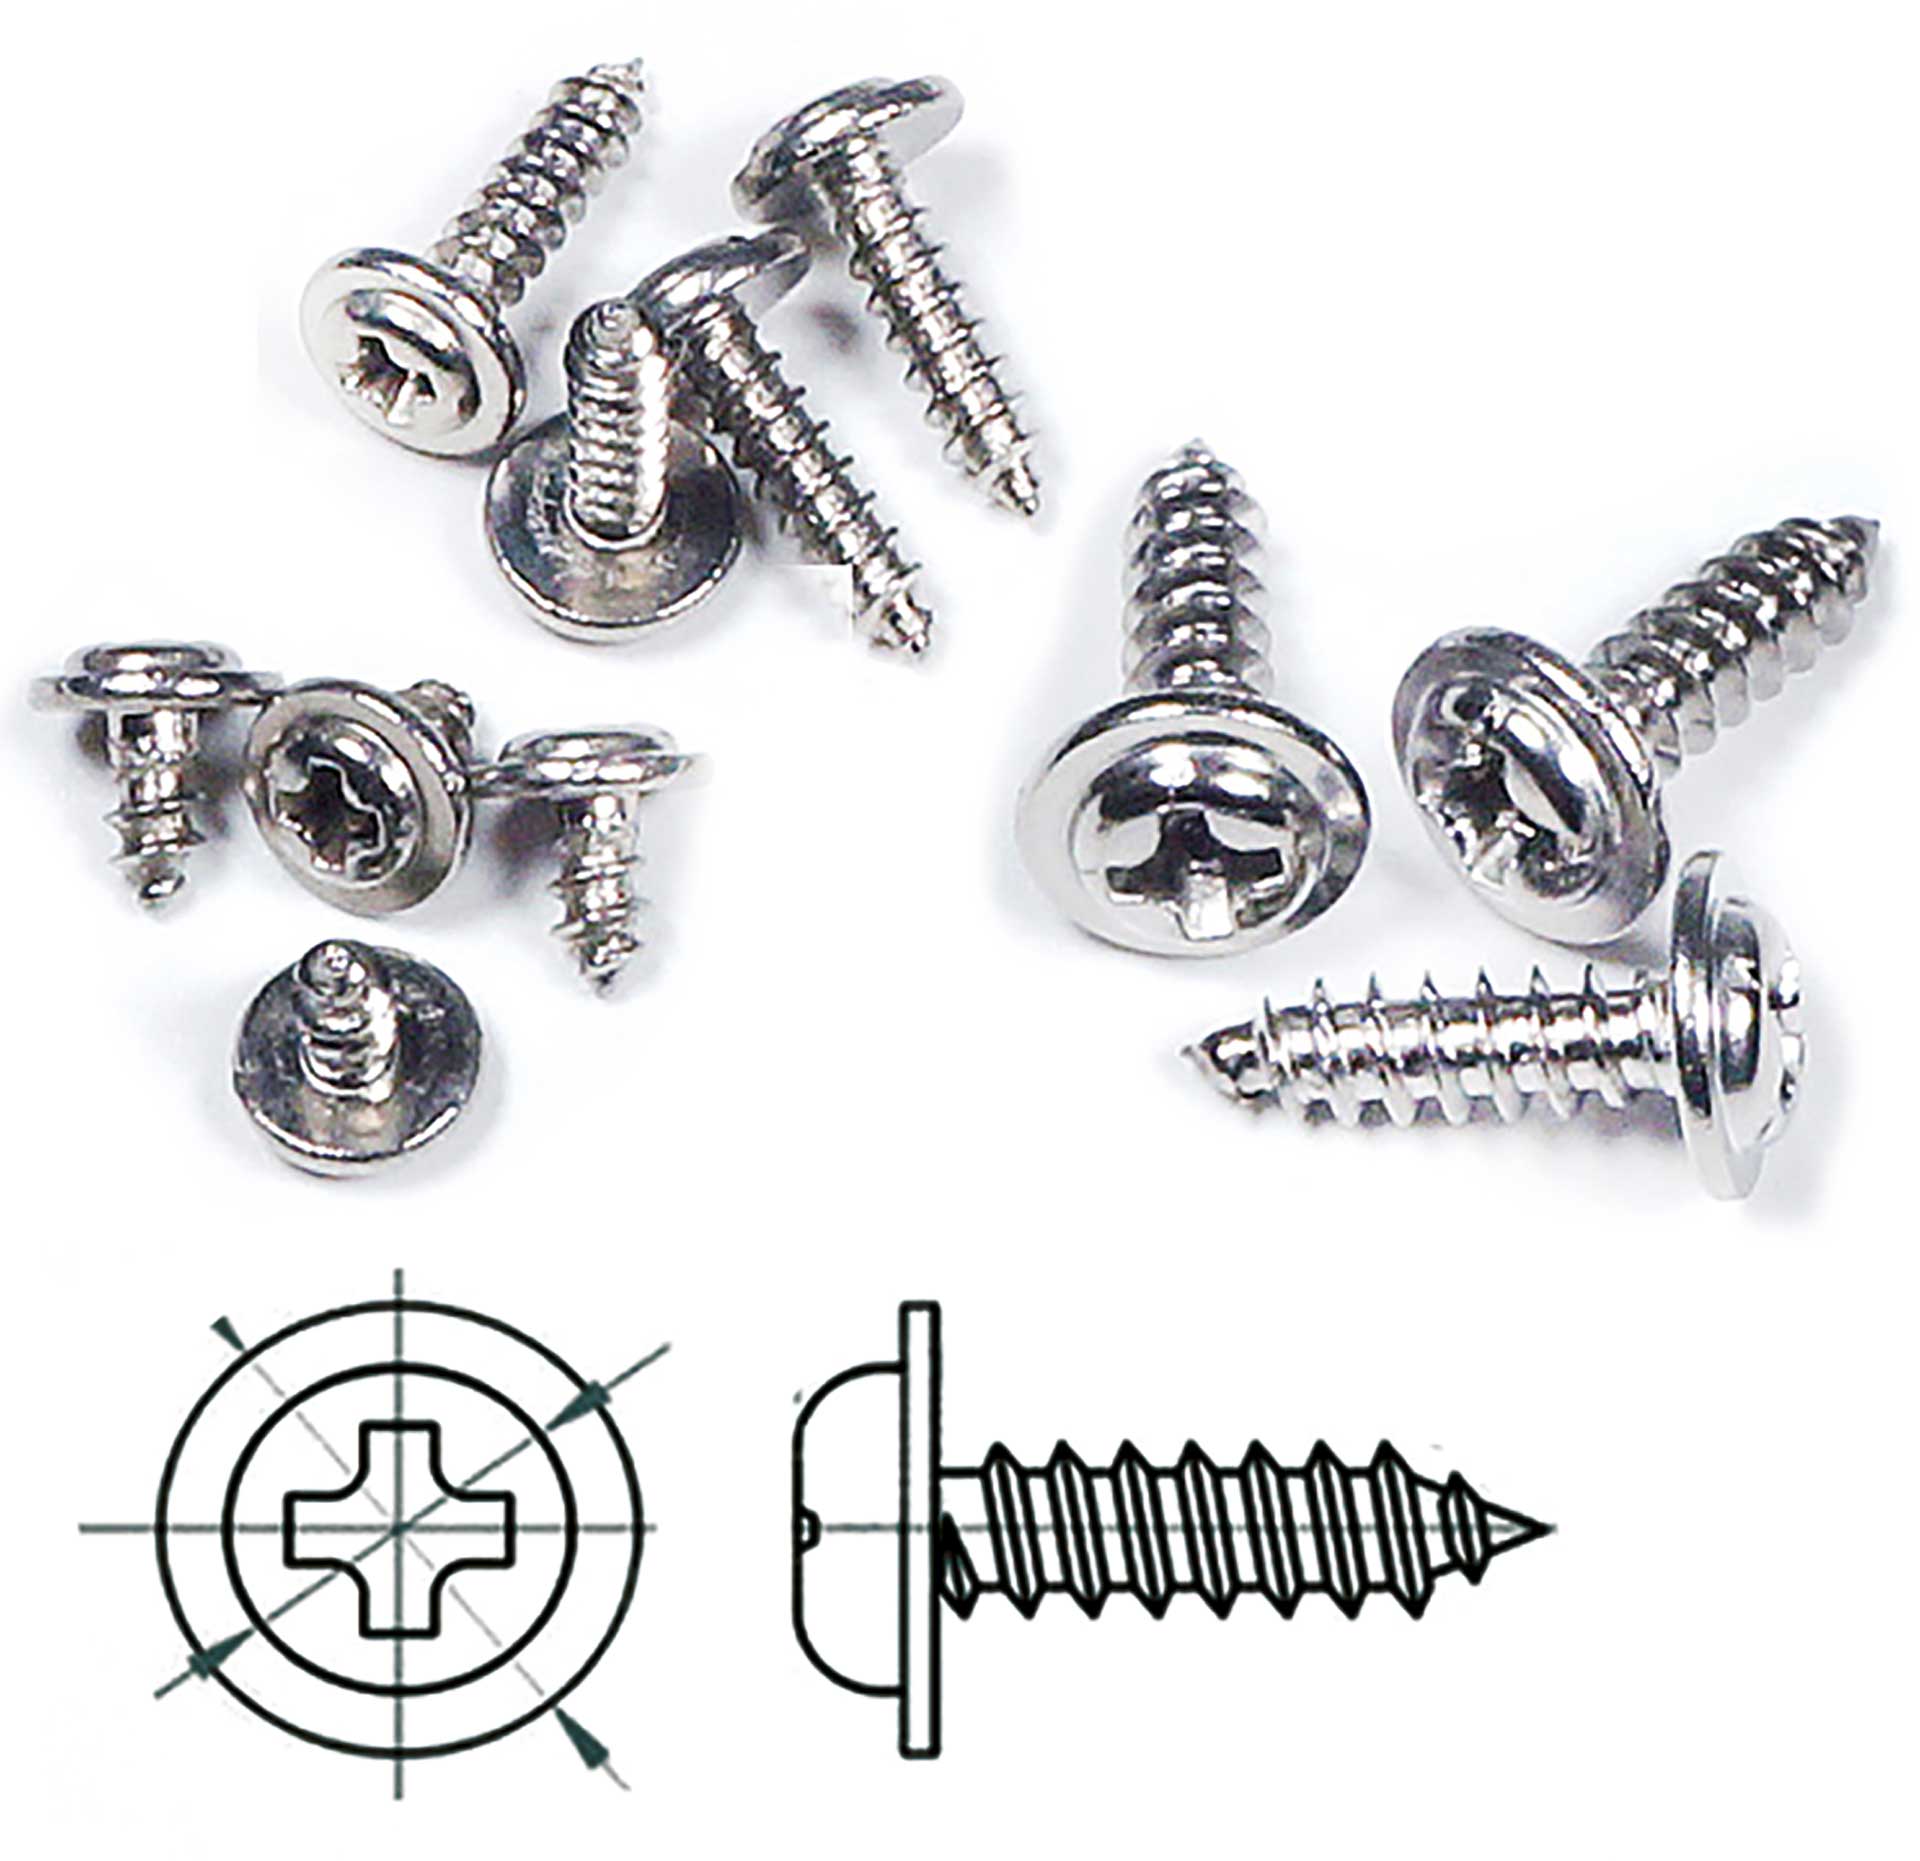 Robbe Modellsport Tapping screws with collar Phillips 2.6x14mm 30pcs. stainless steel